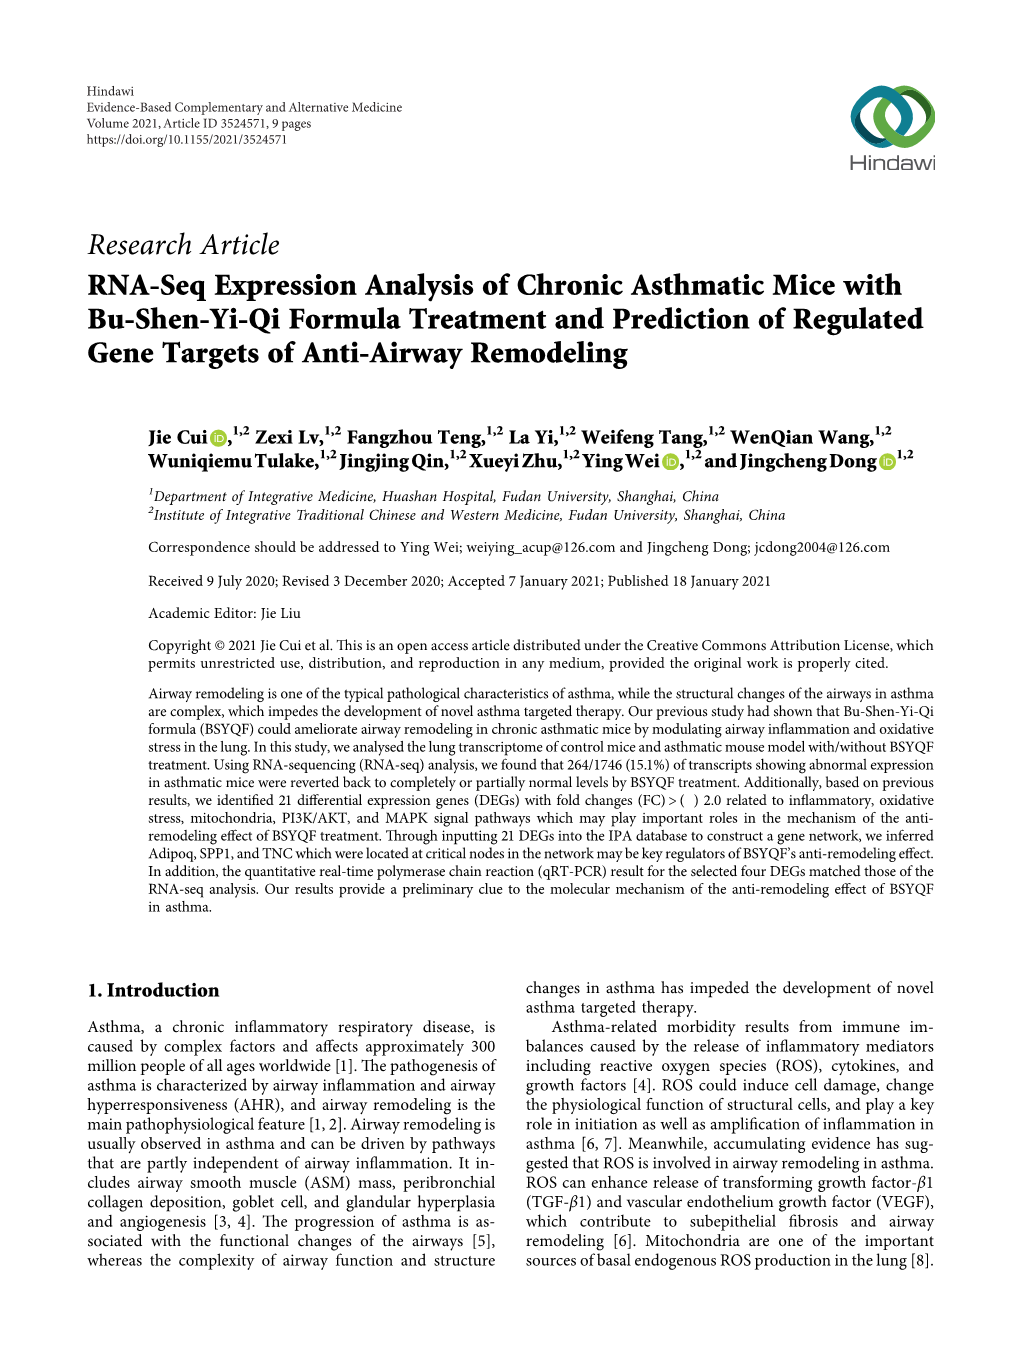 Research Article RNA-Seq Expression Analysis of Chronic Asthmatic Mice